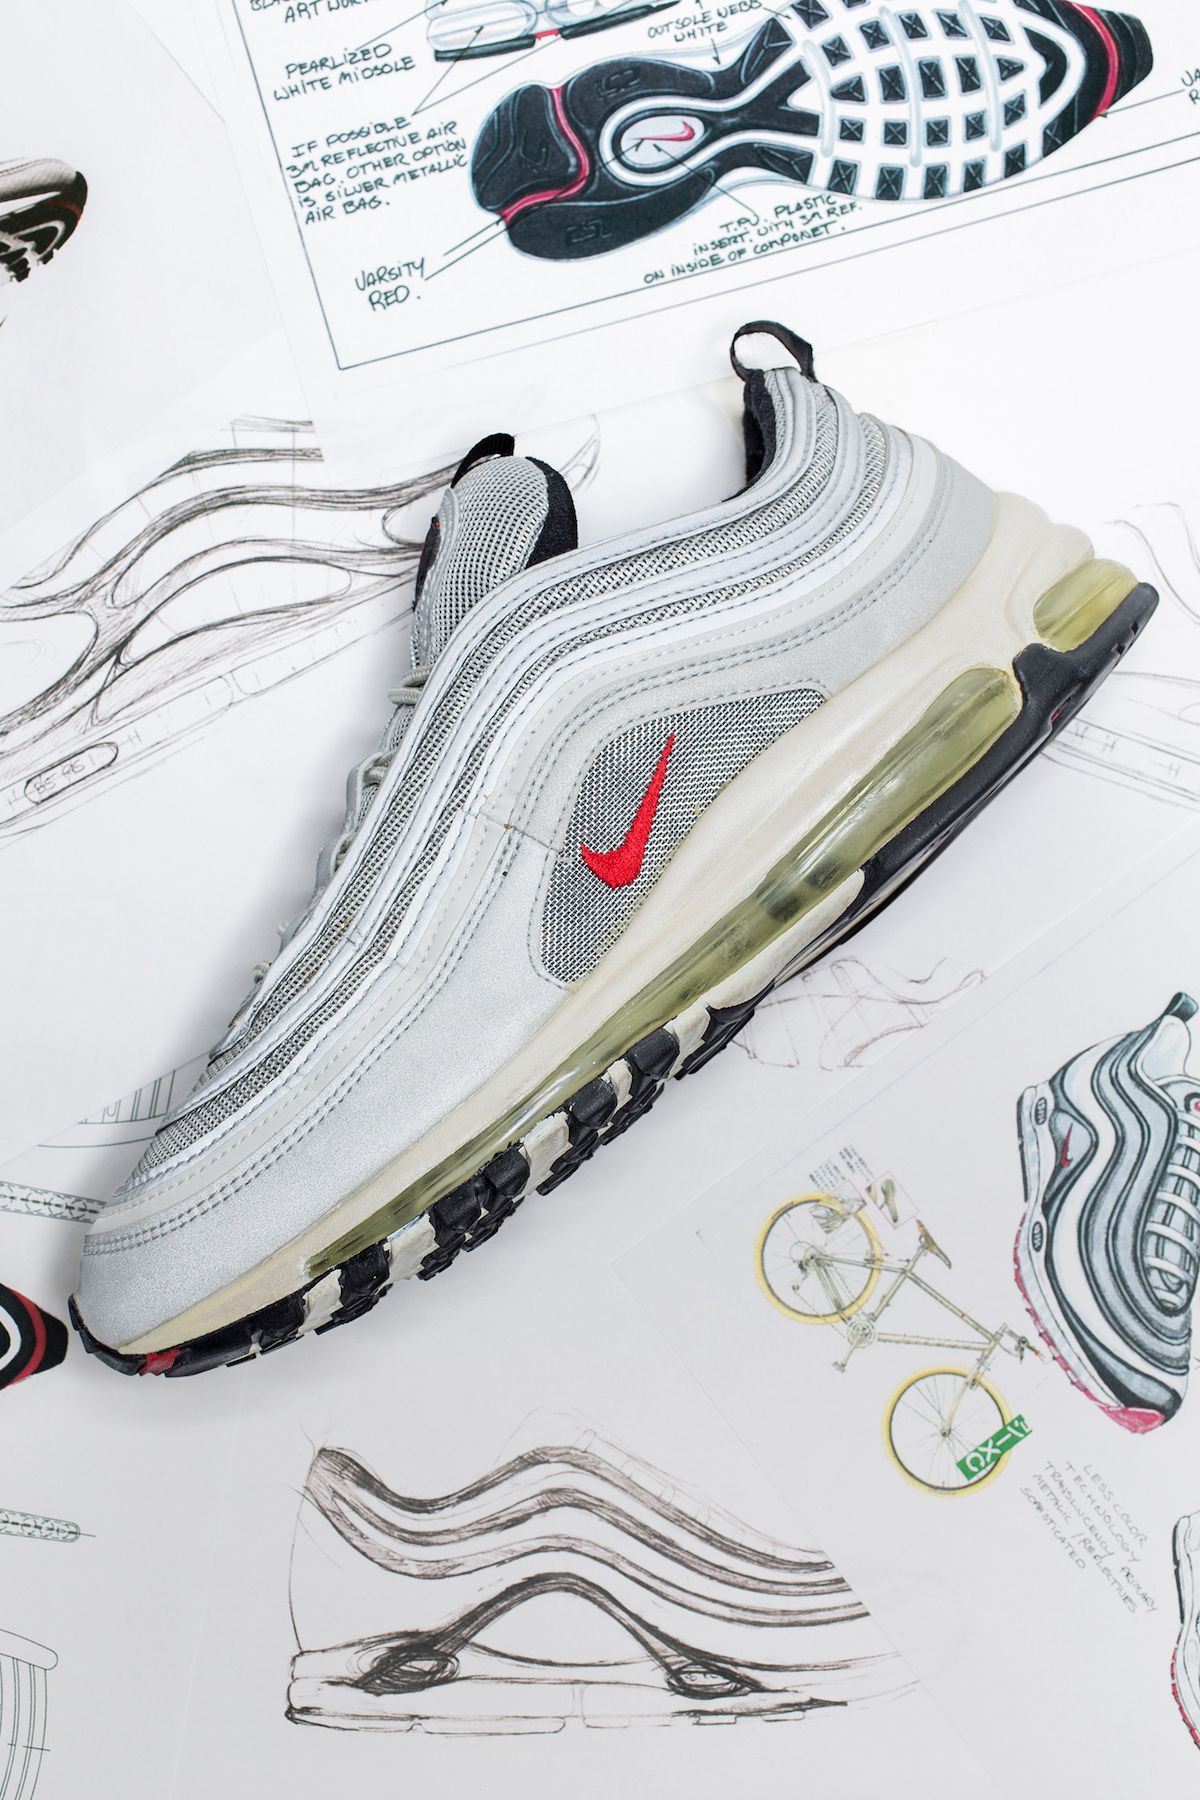 Counterpart Complaint chief Nike Air Max 97 Release Guide for Fall - 10 Colorways to Celebrate 20 Years  - WearTesters